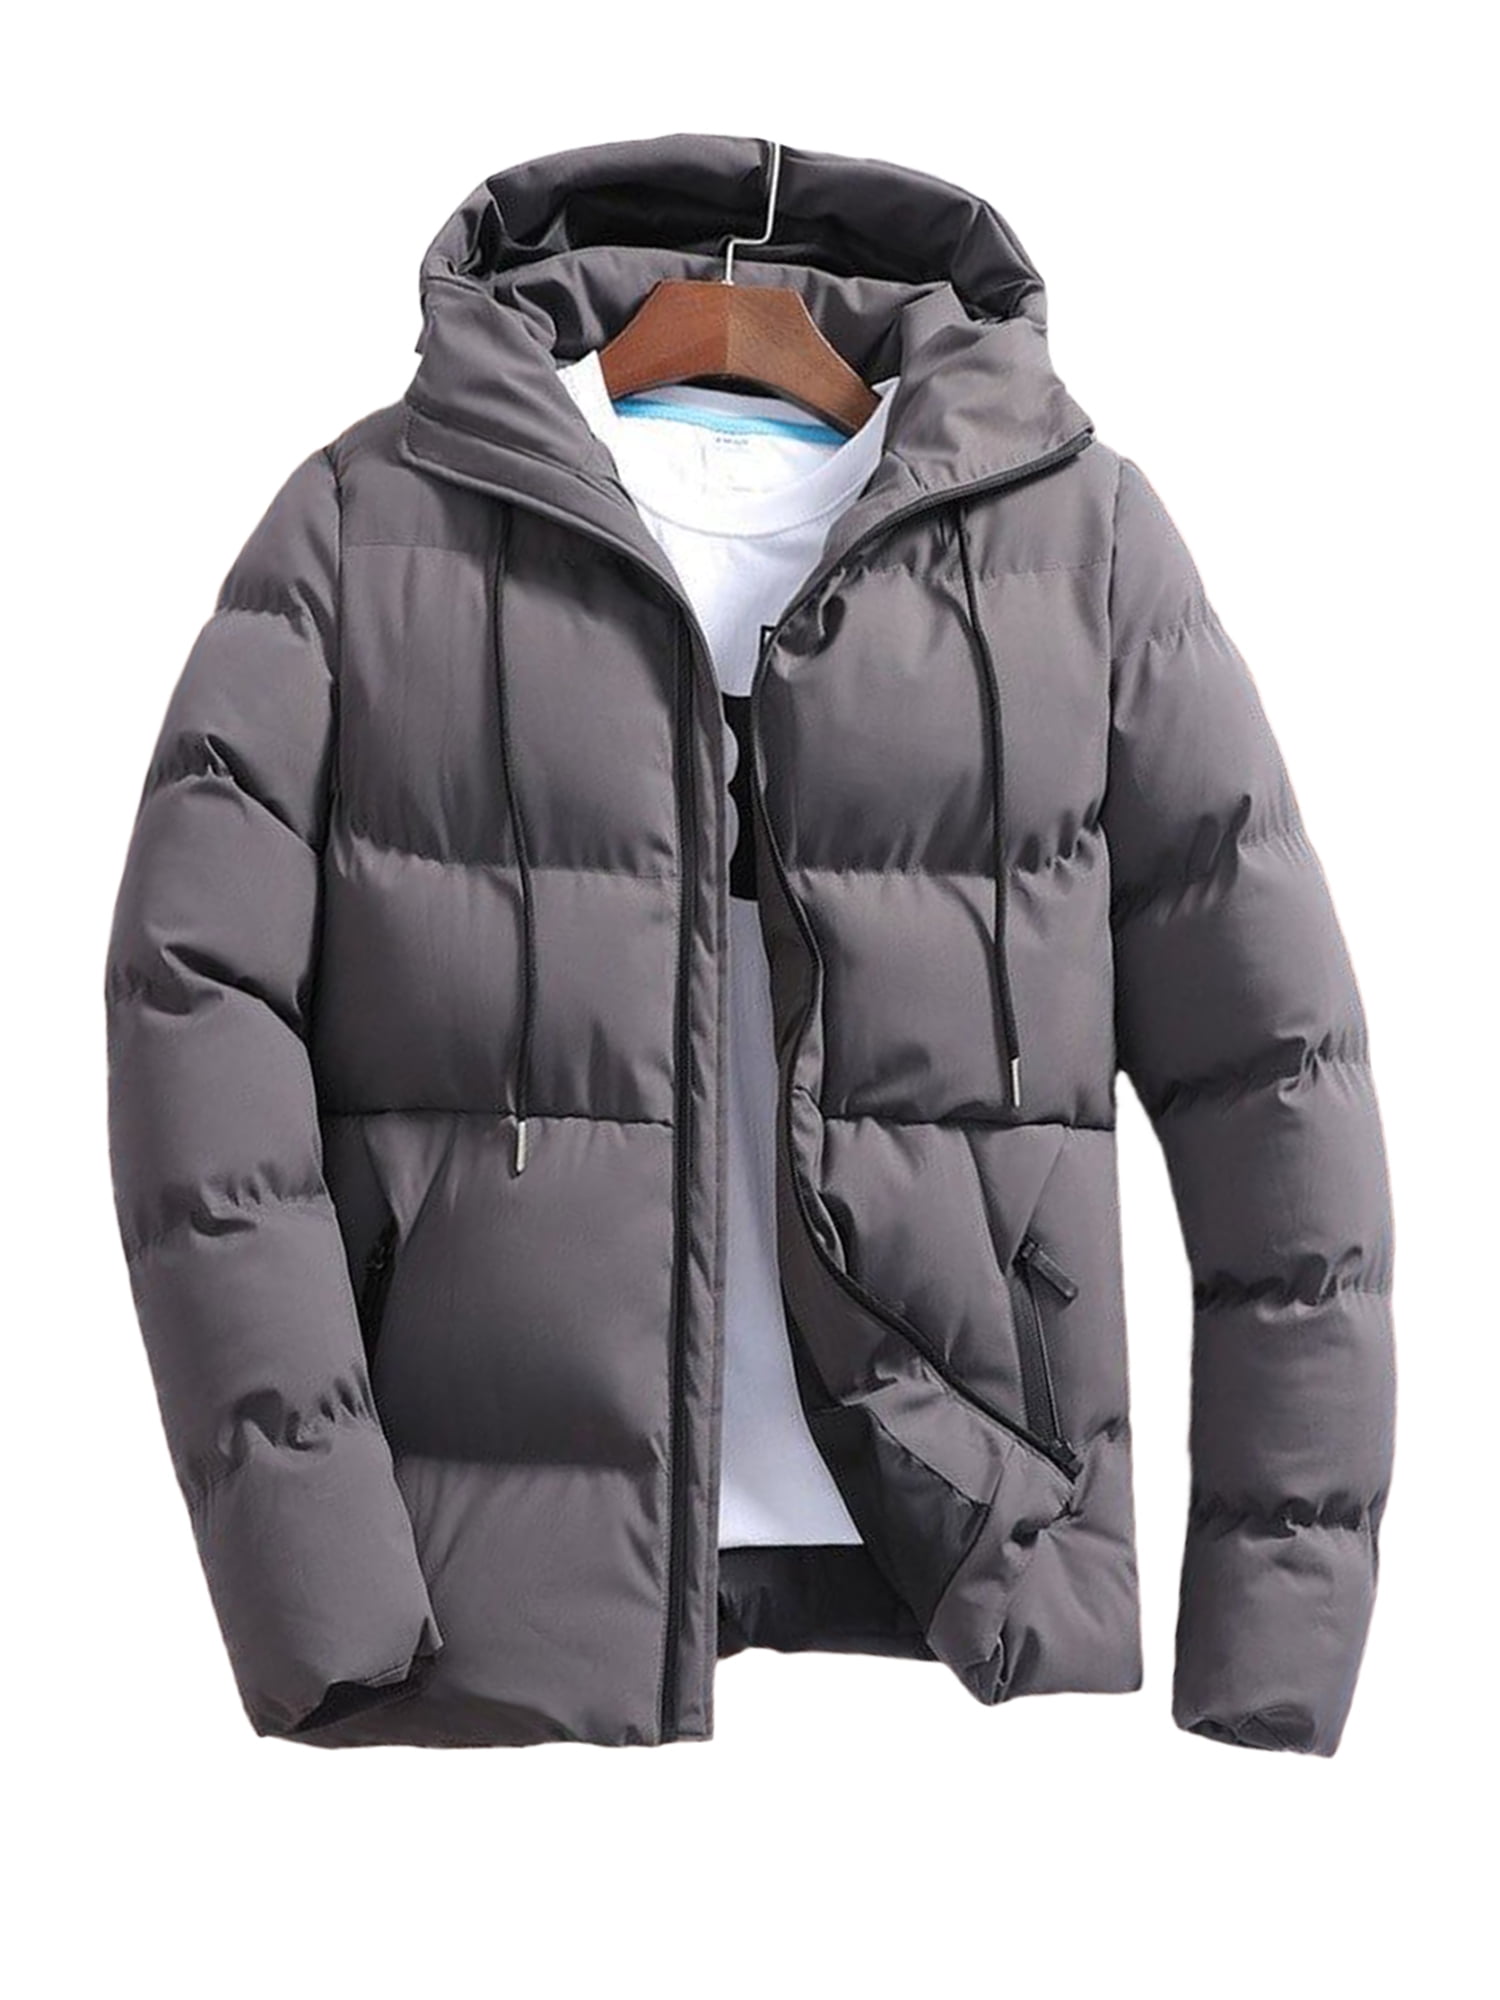 Grianlook Puffer Jacket For Mens Hooded Neck Winter Coat Solid Color Full Zip Winter Outerwear Deep Gray -